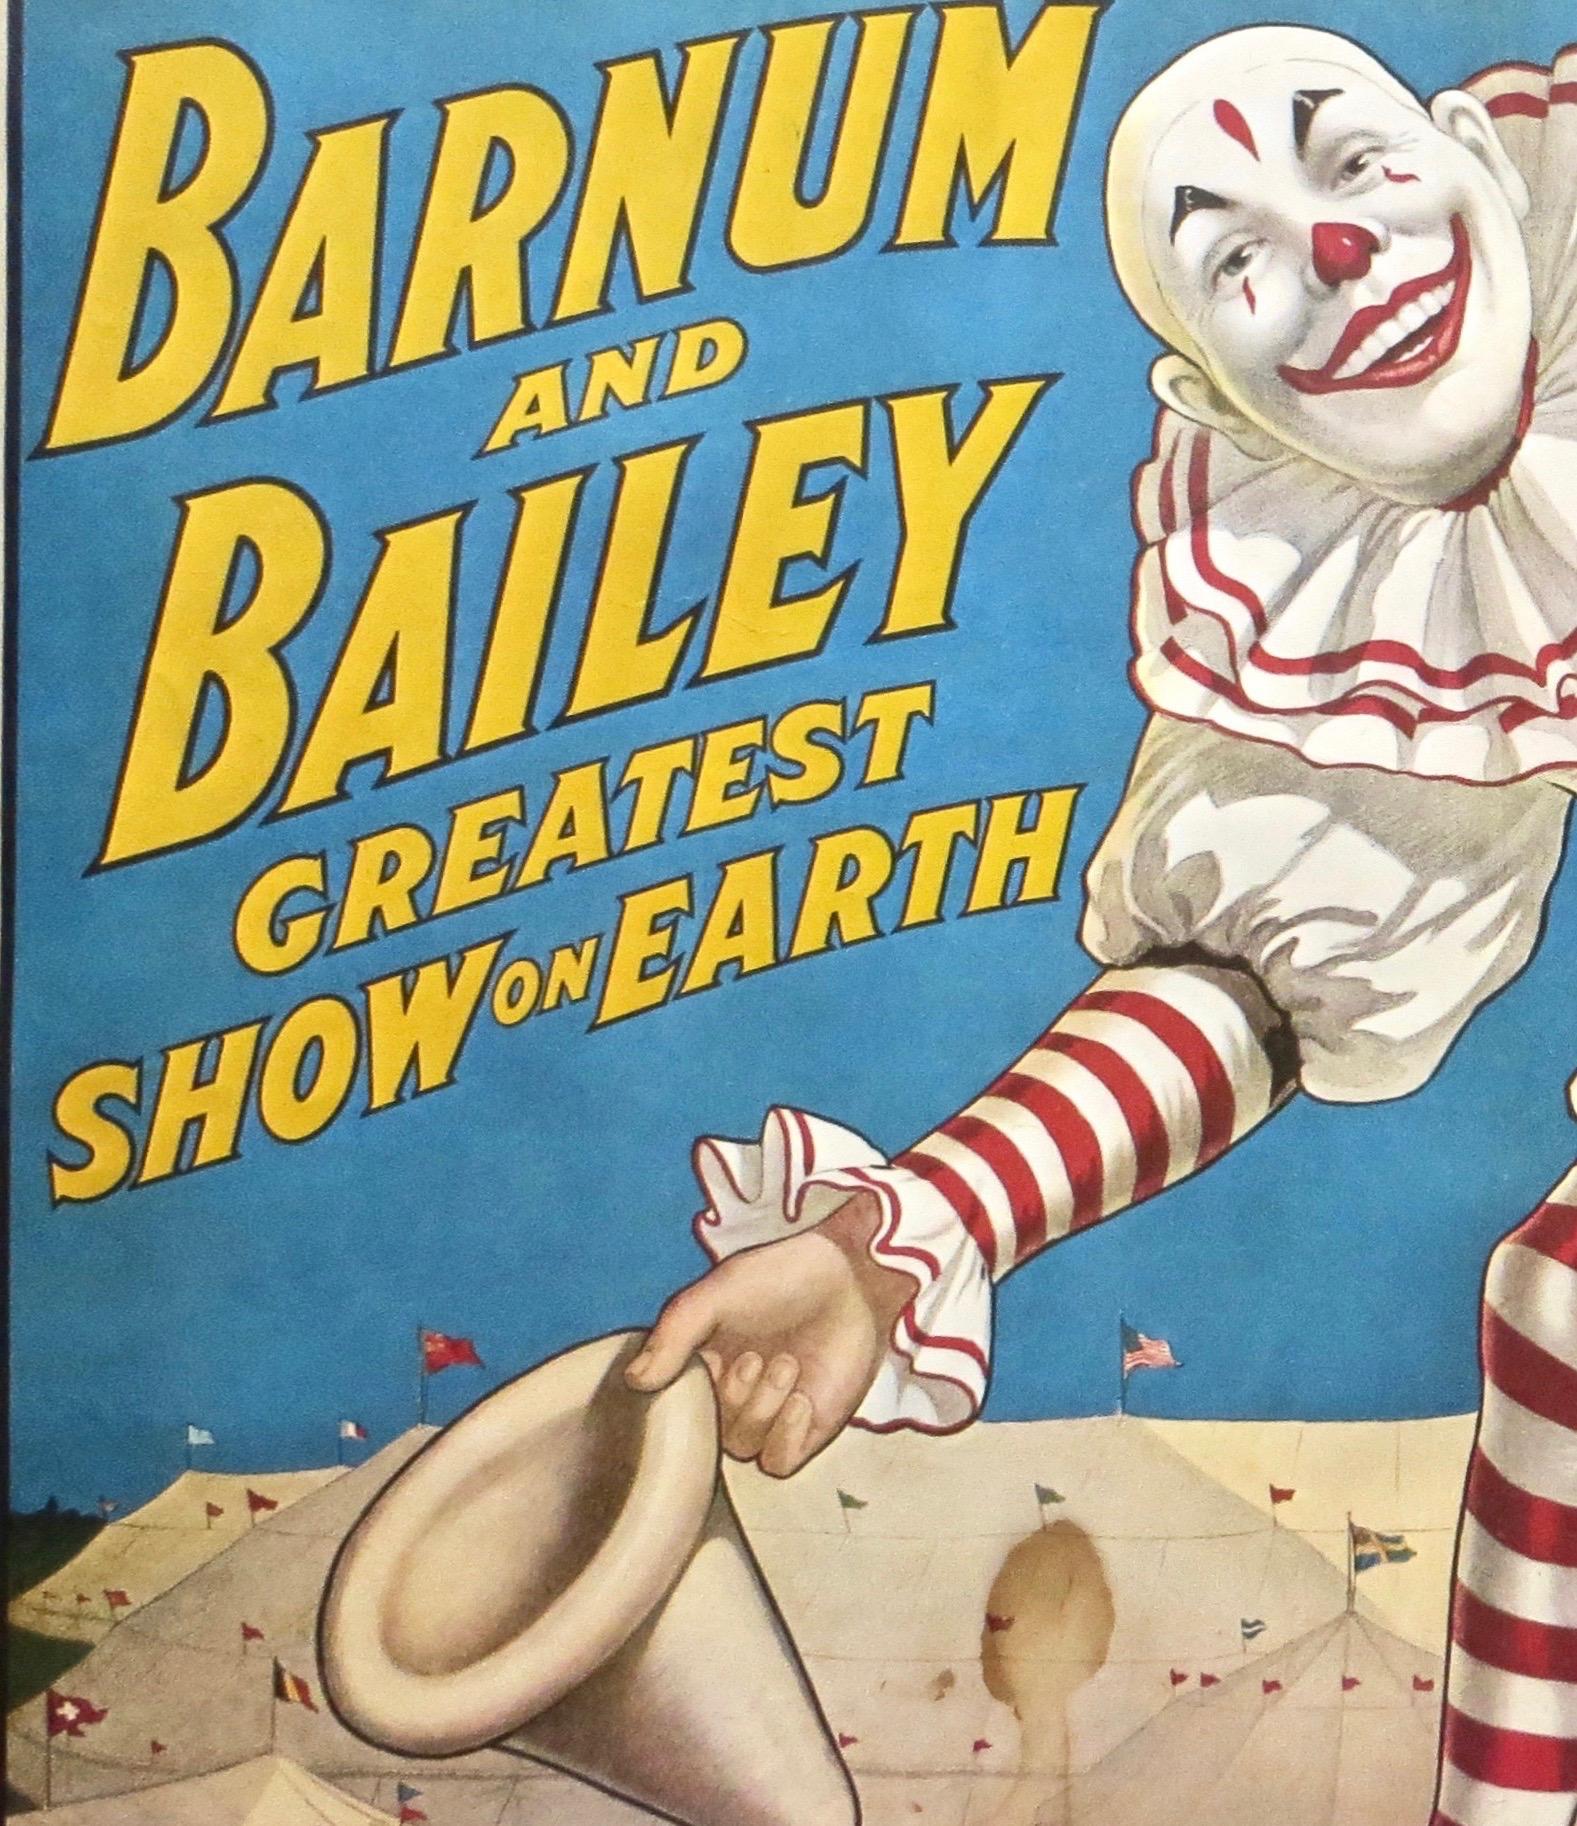 This highly animated, bright and colorful circus poster portrays a fabulous looking clown in white frilled garb with red stripes, welcoming everyone to see the 